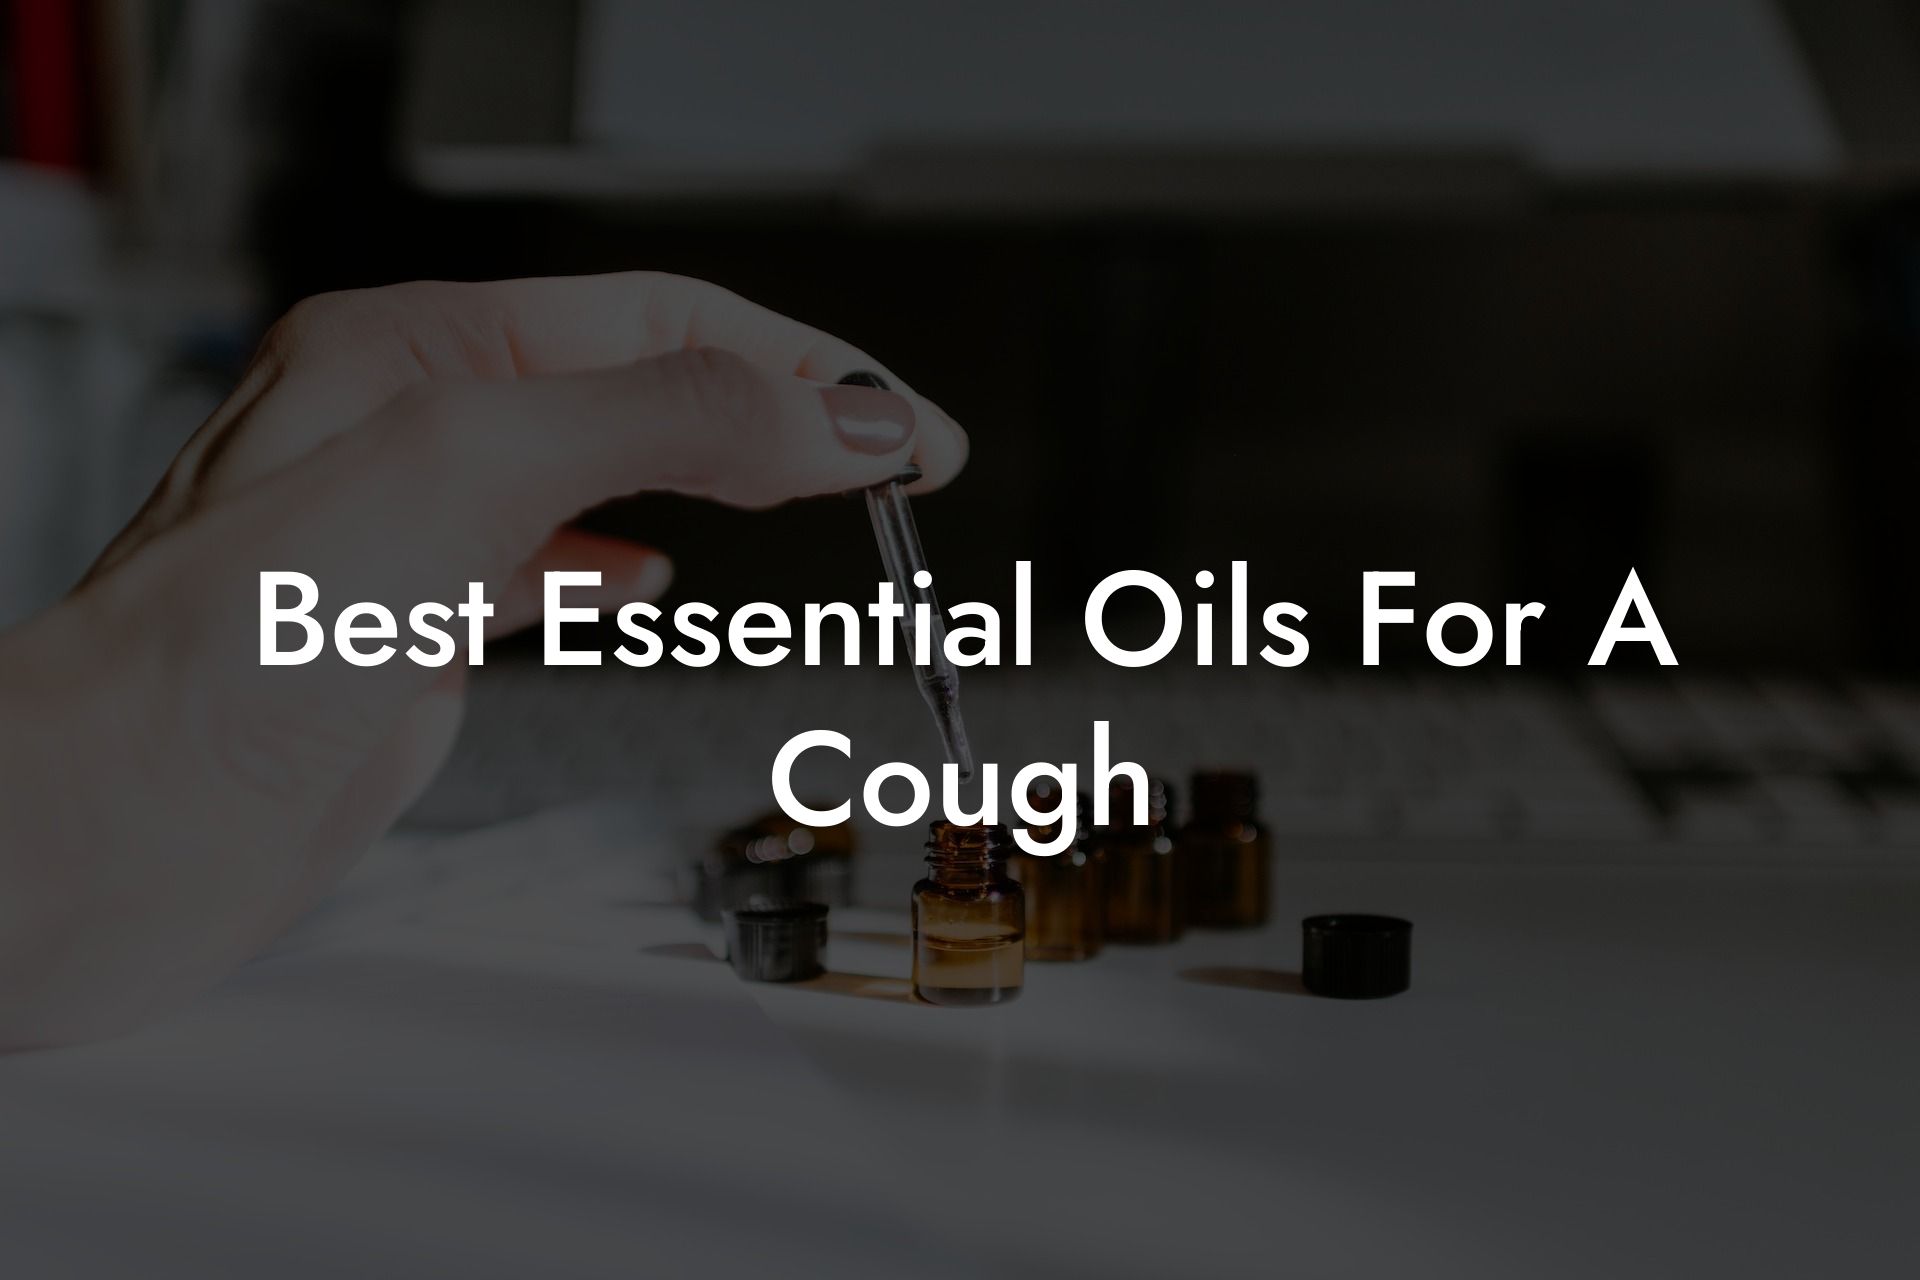 Best Essential Oils For A Cough